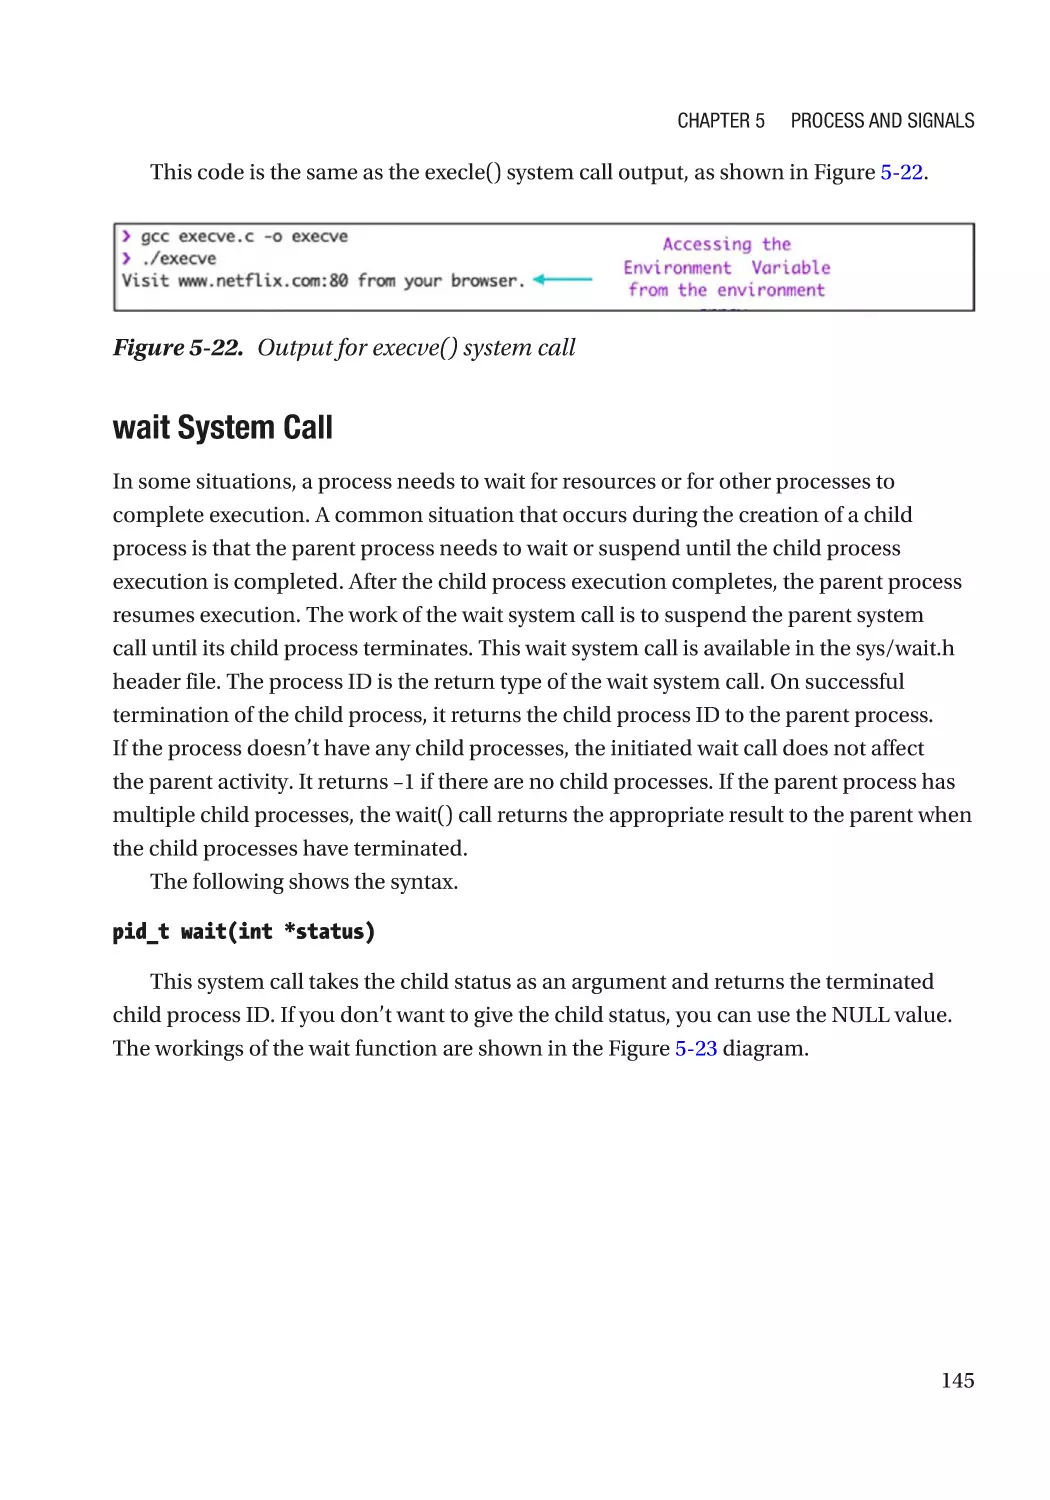 wait System Call